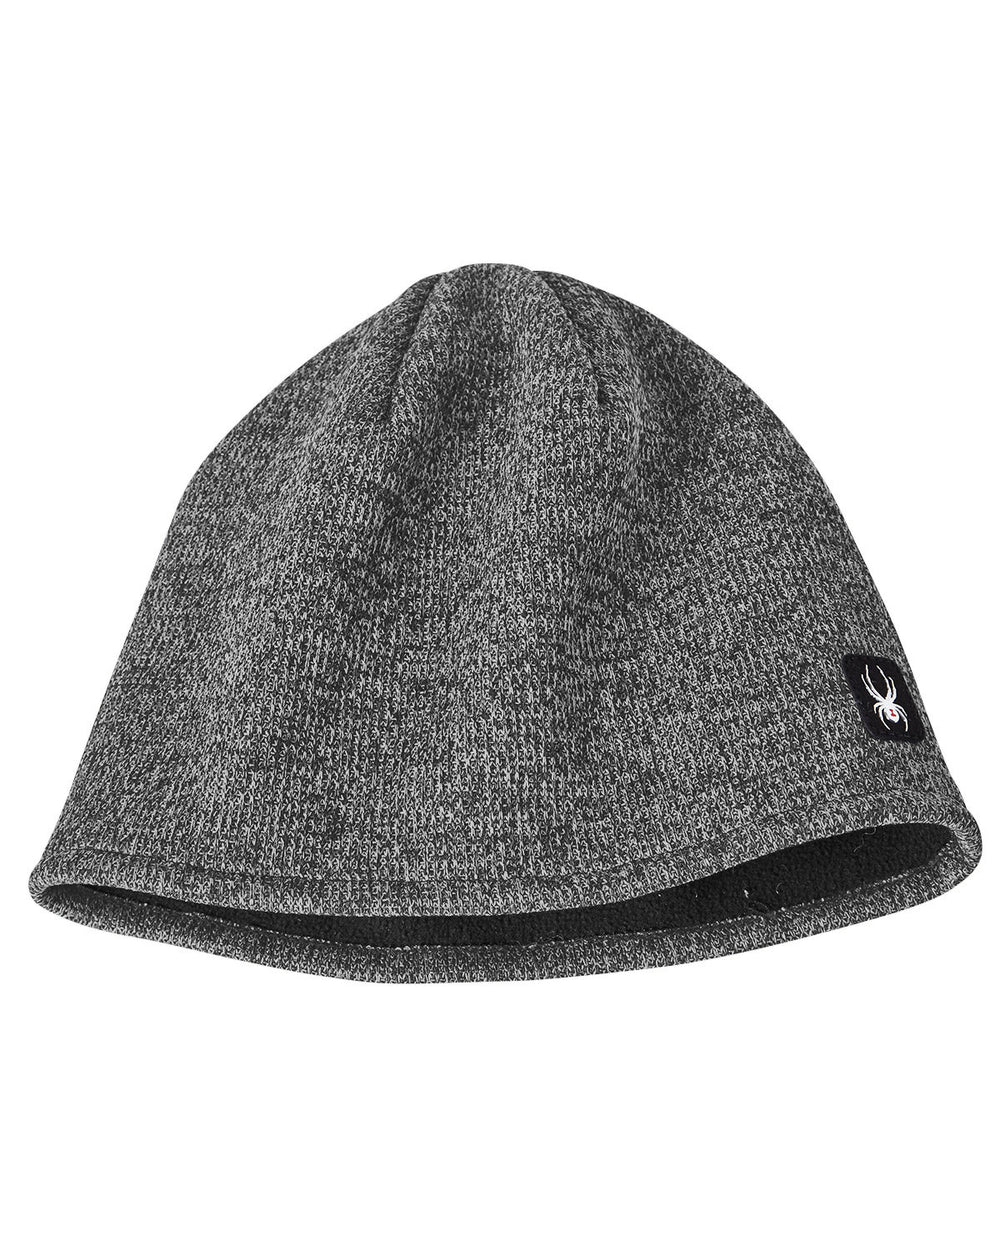 Spyder SH16794 Adult Constant Sweater Beanie